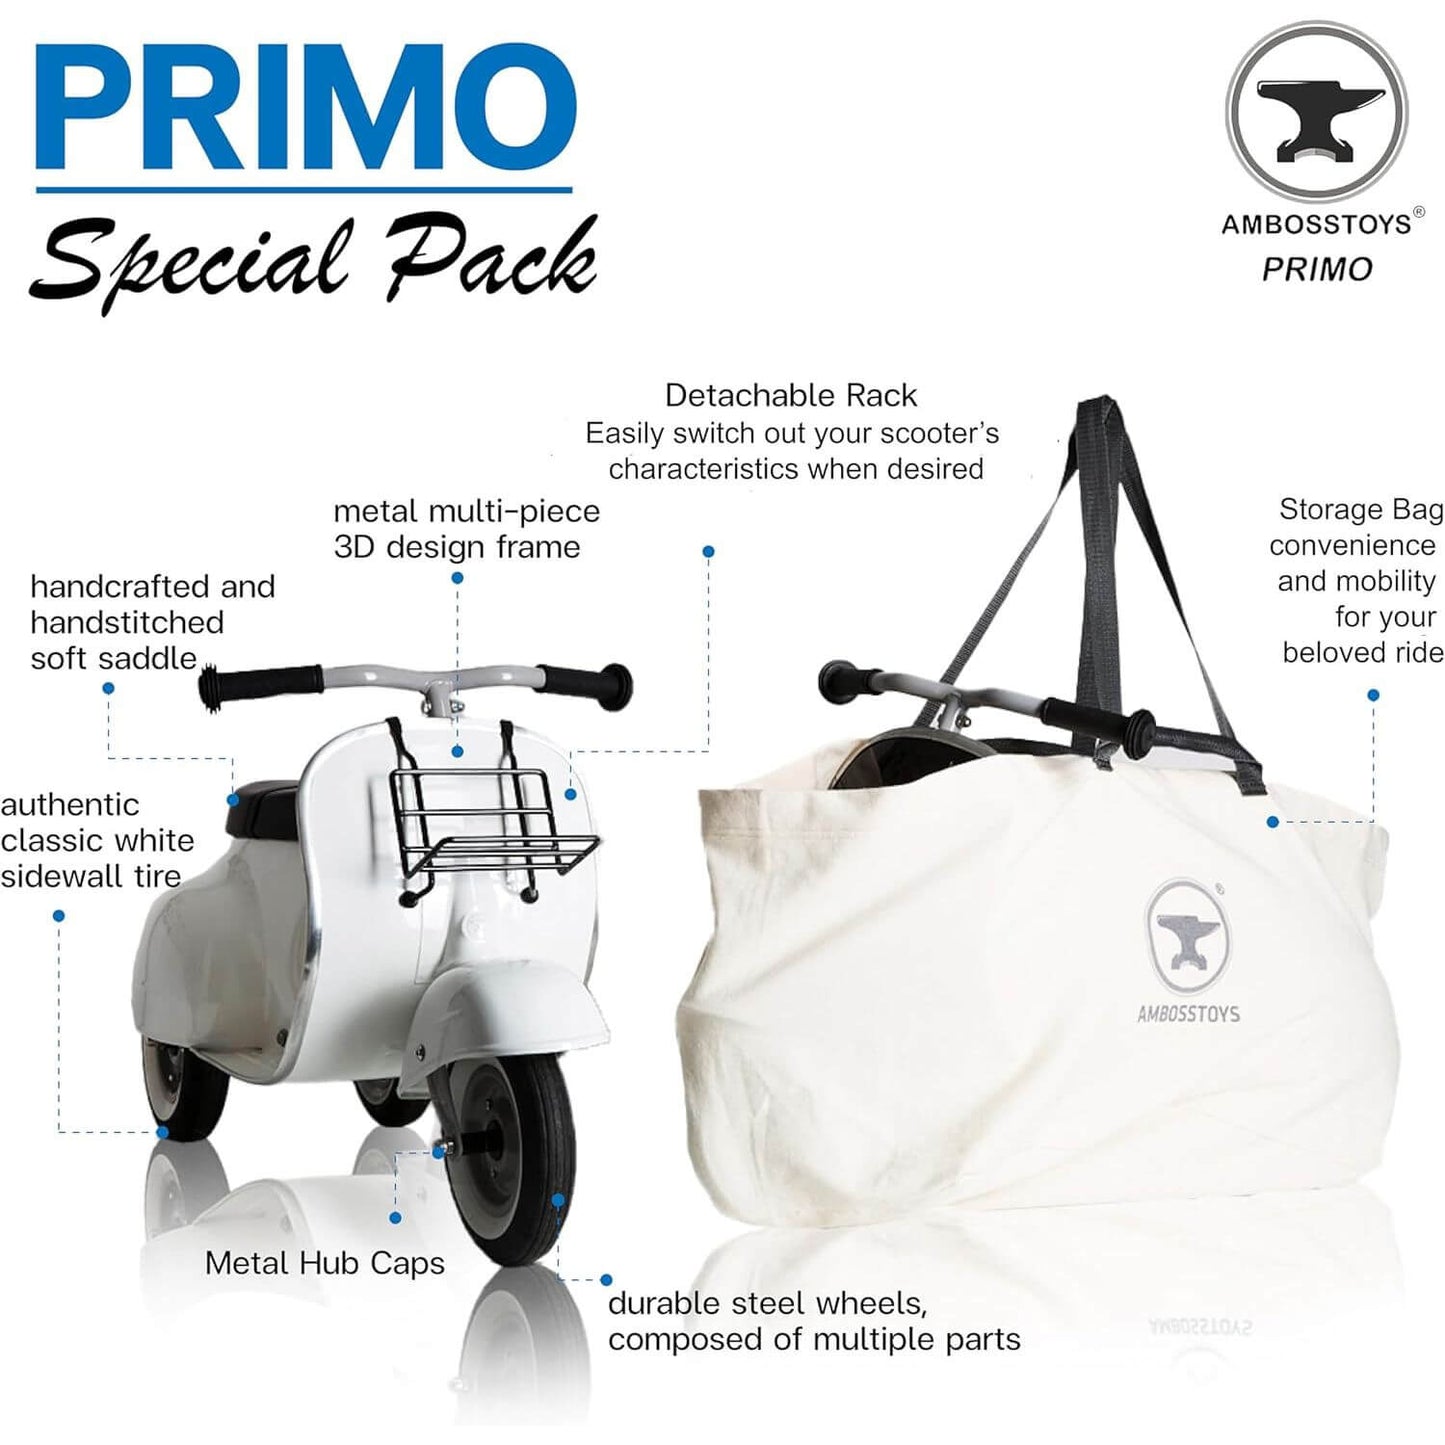 Primo Super White Ride-On Scooter - Features